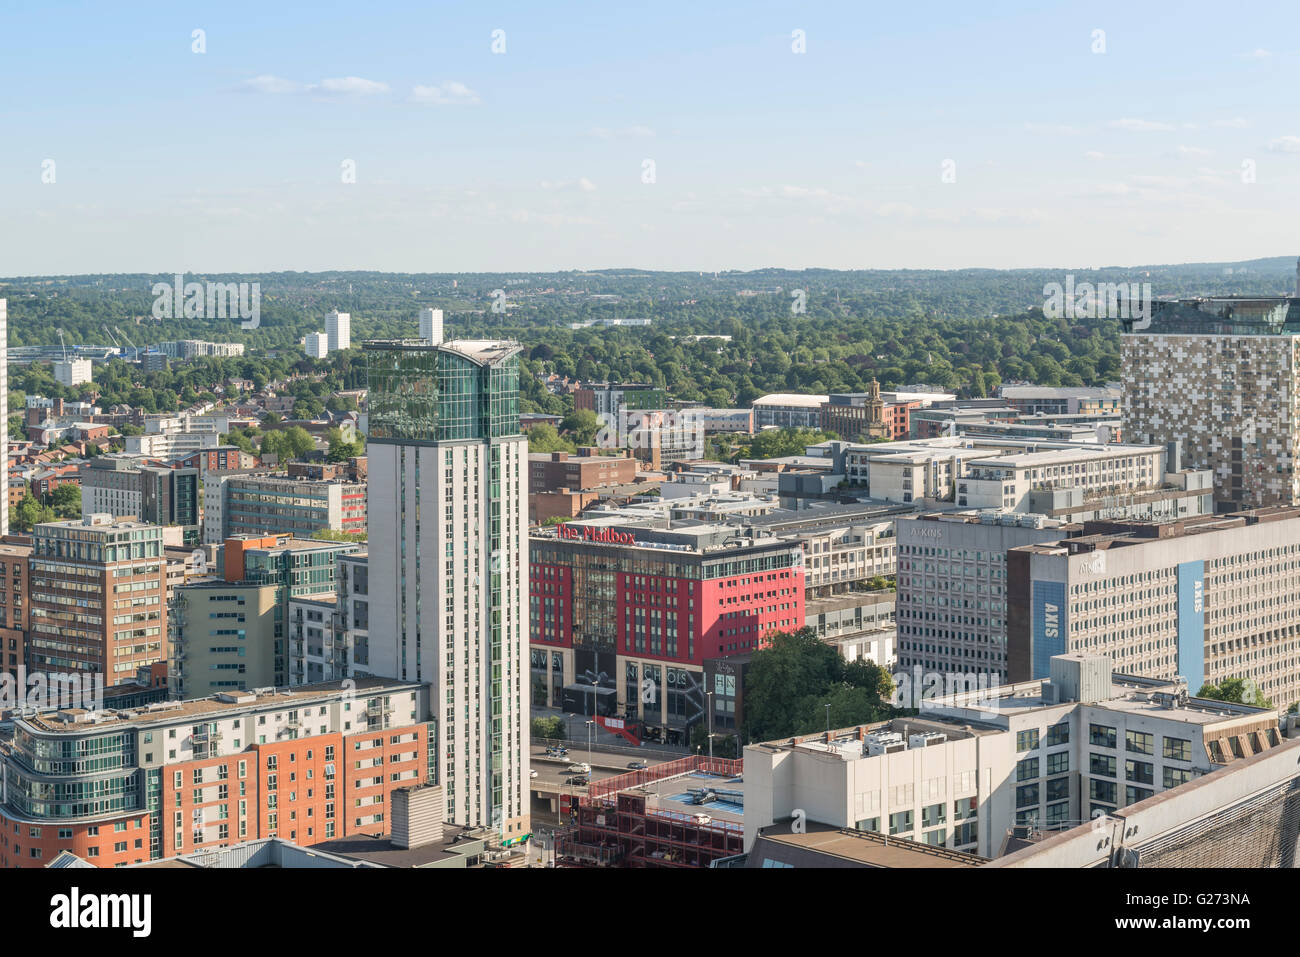 Aerial photograph of Birmingham City Centre, England. Showing The Mailbox, The Cube and apartments. Stock Photo